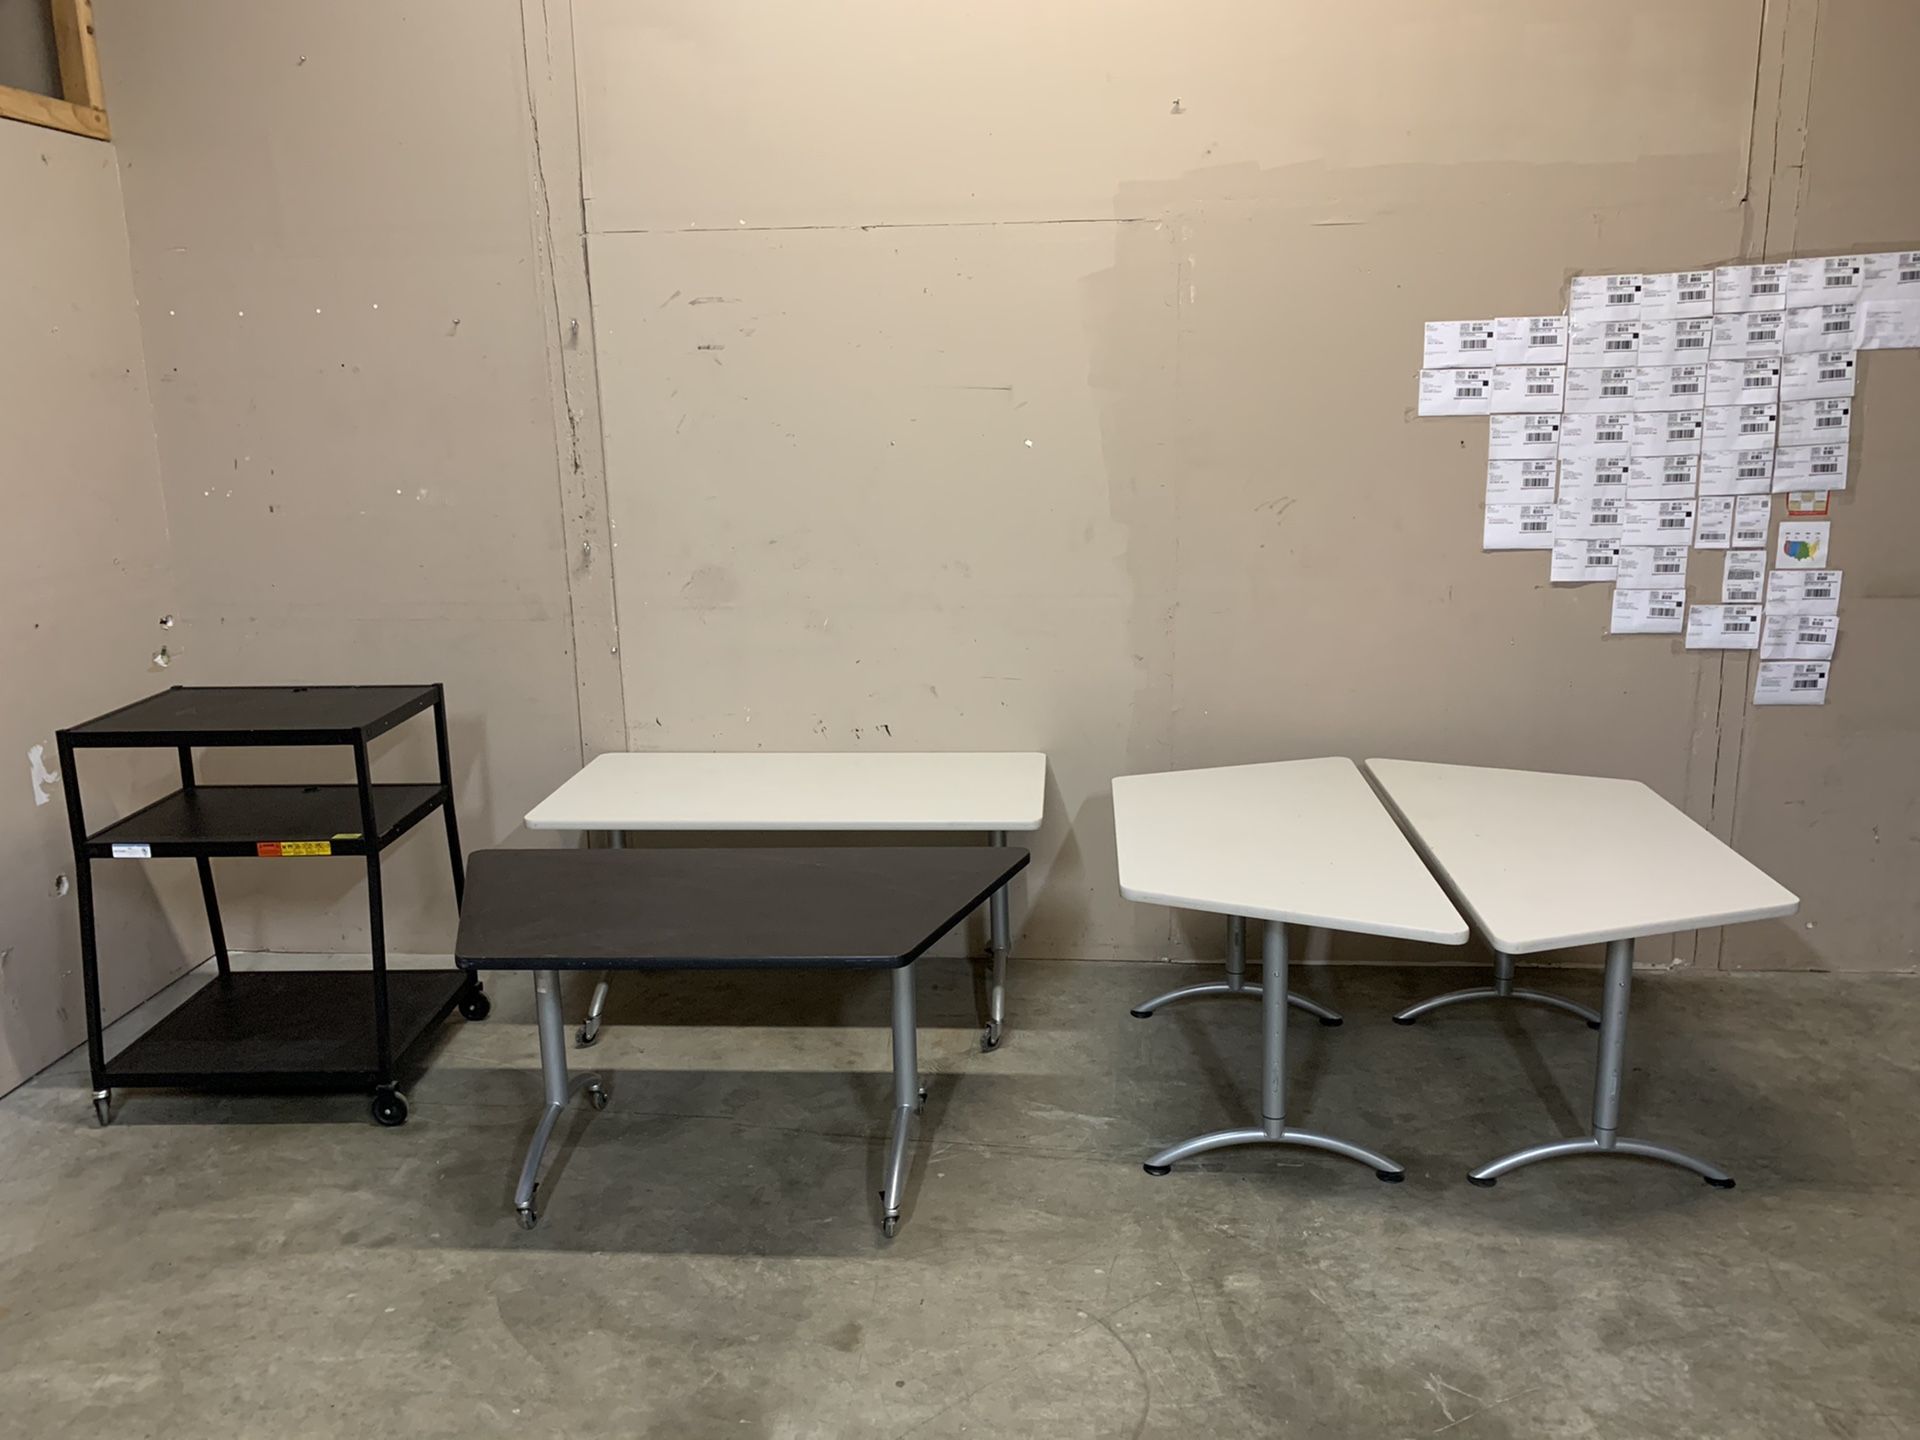 Office Work tables (Free) must be picked up by 4pm or going to waste station